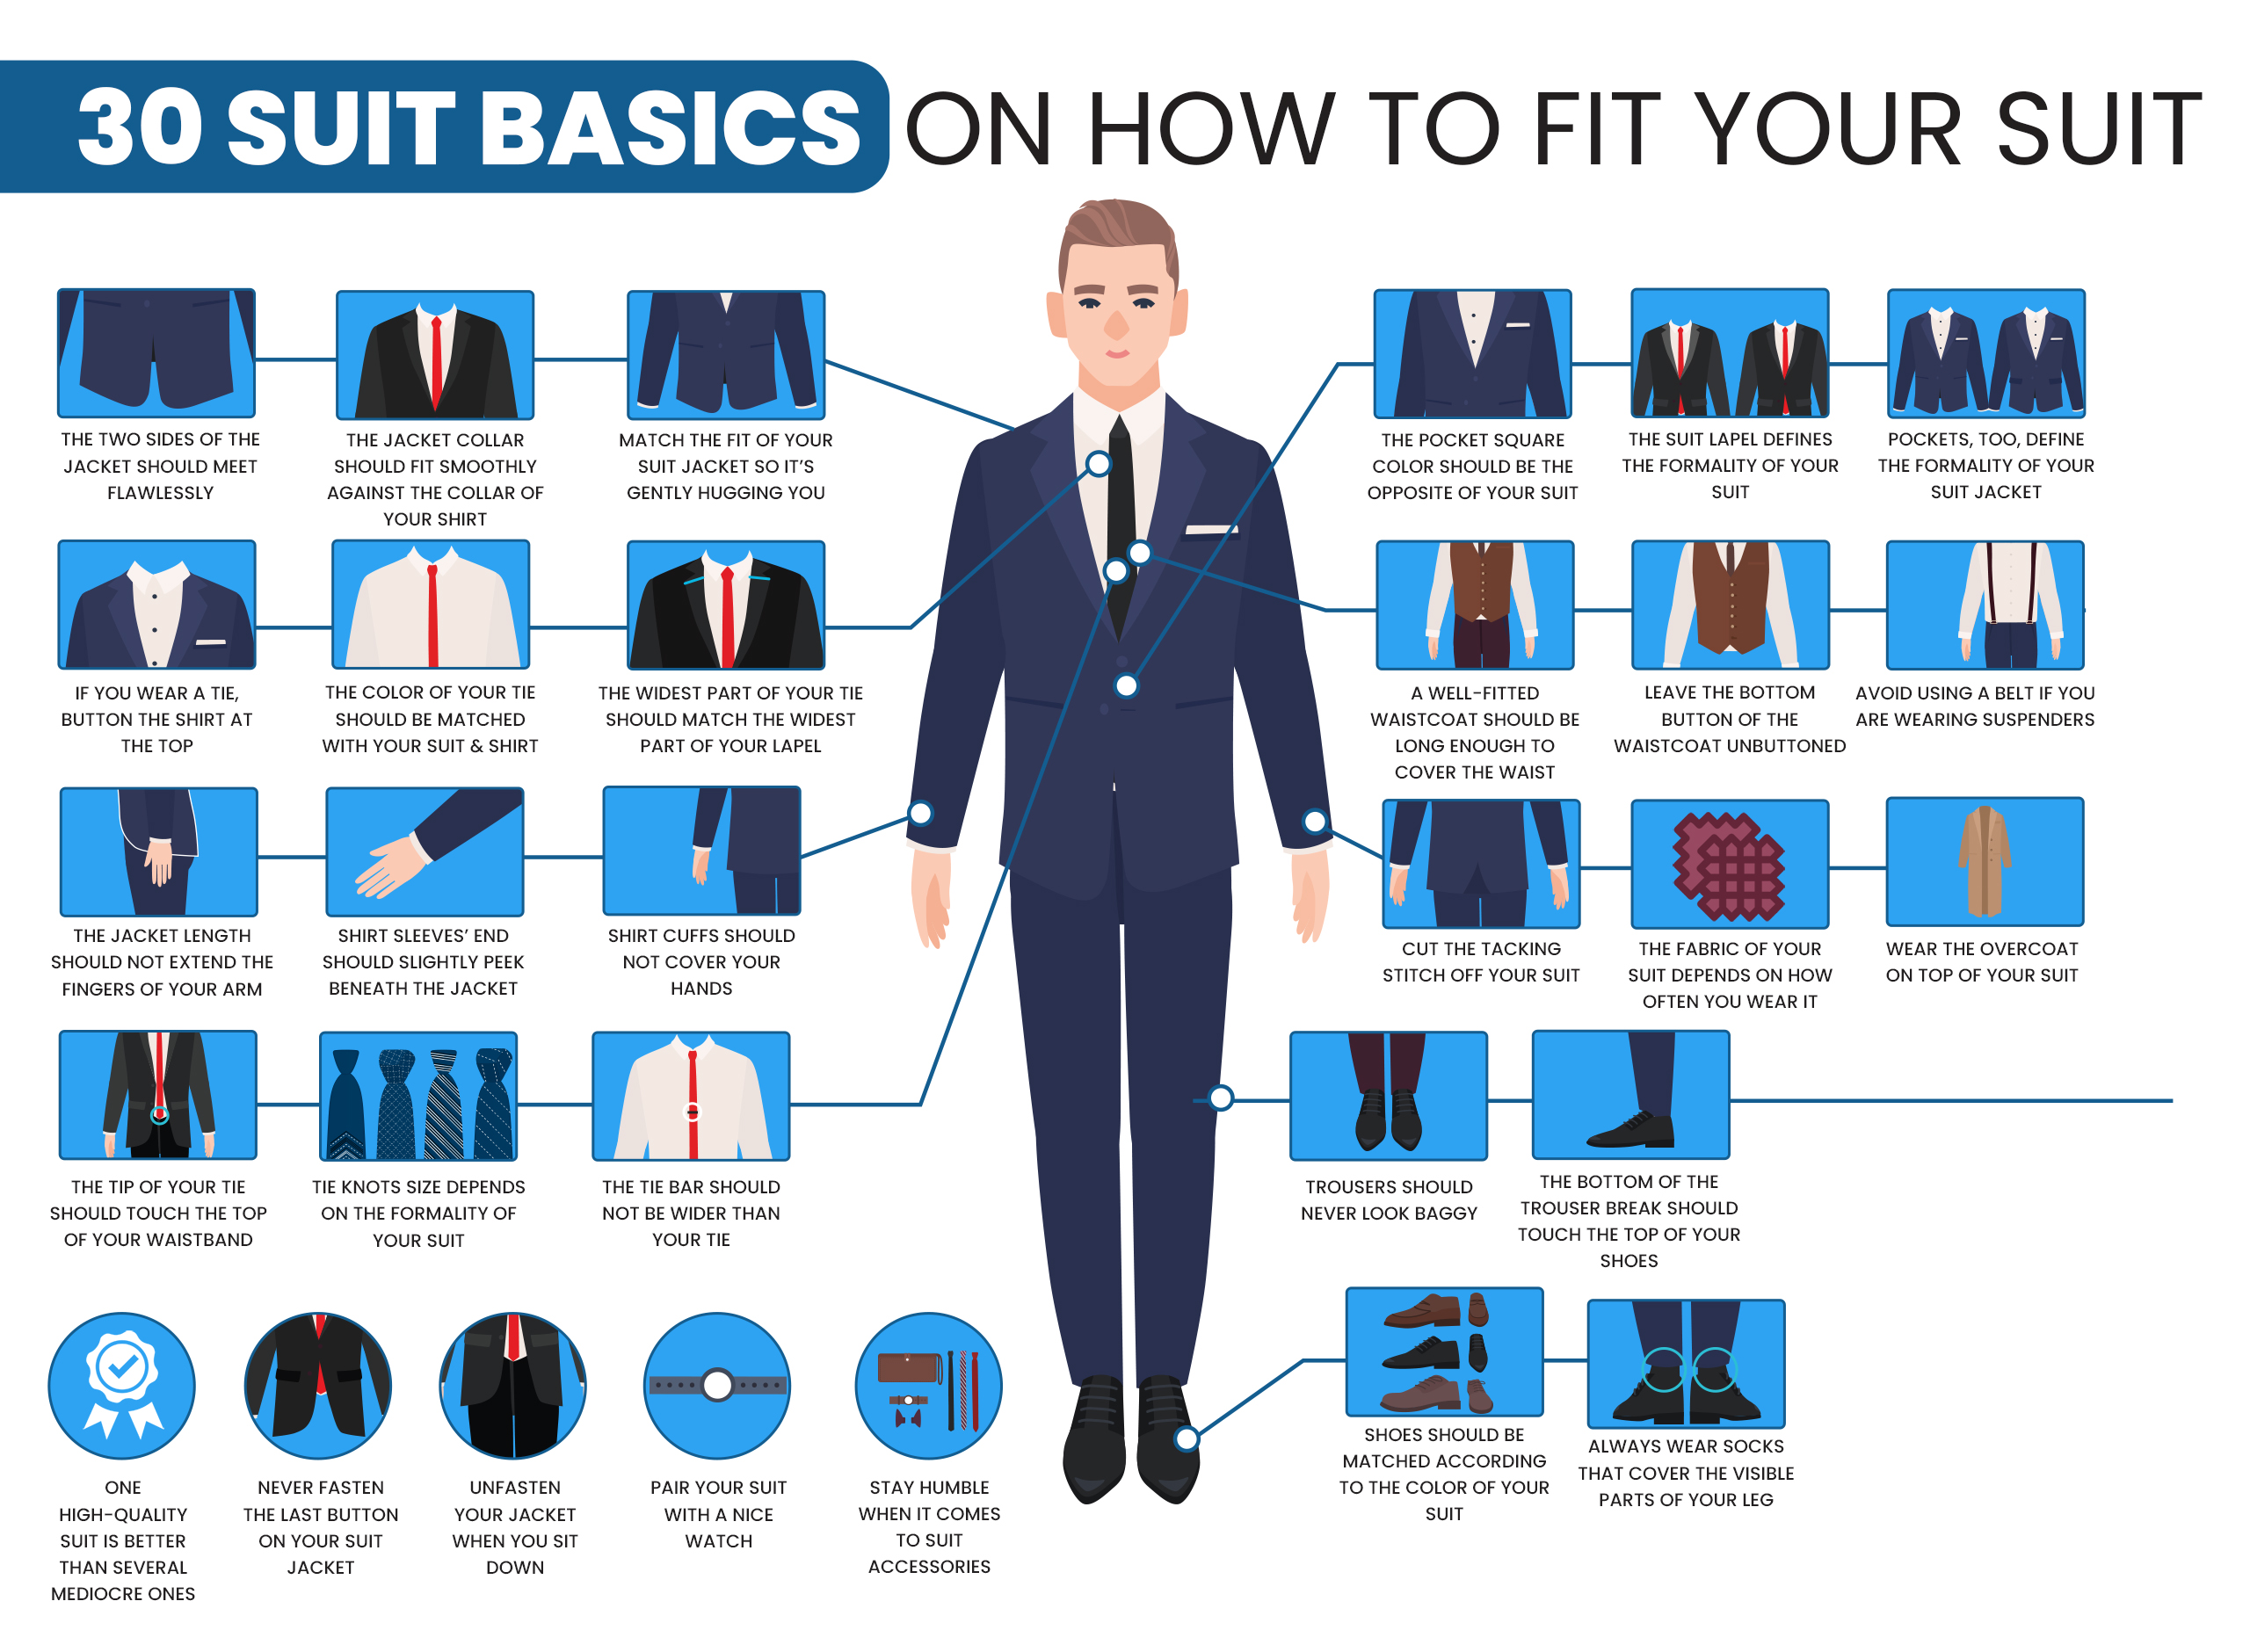 Instrument Uncertain needle How to Measure for a Suit: Find Your Jacket and Pants Size